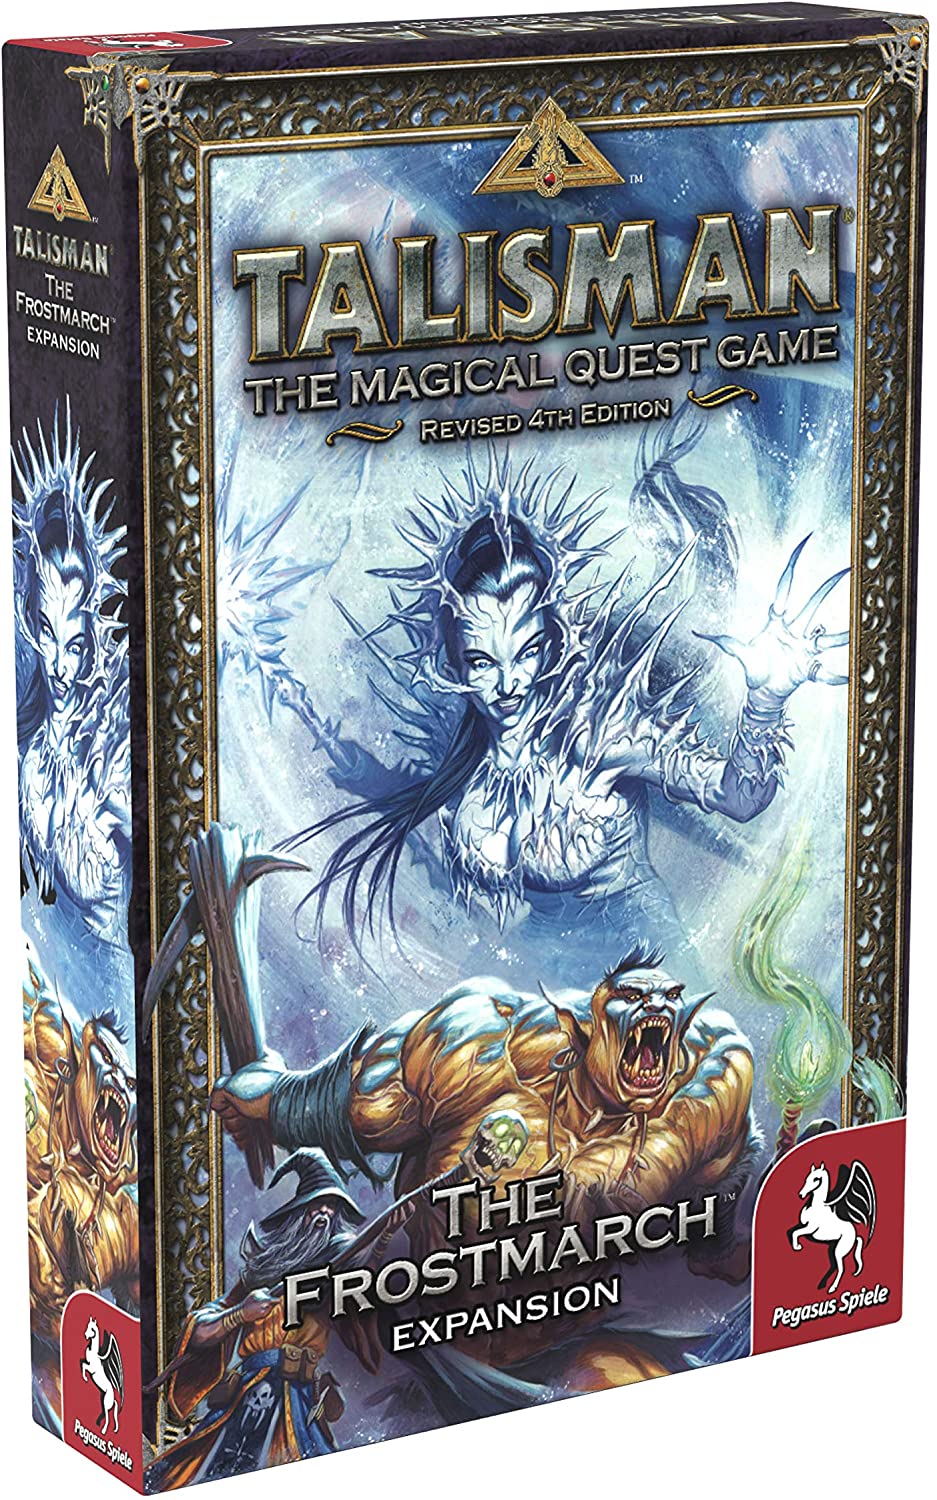 Talisman: The Frostmarch 